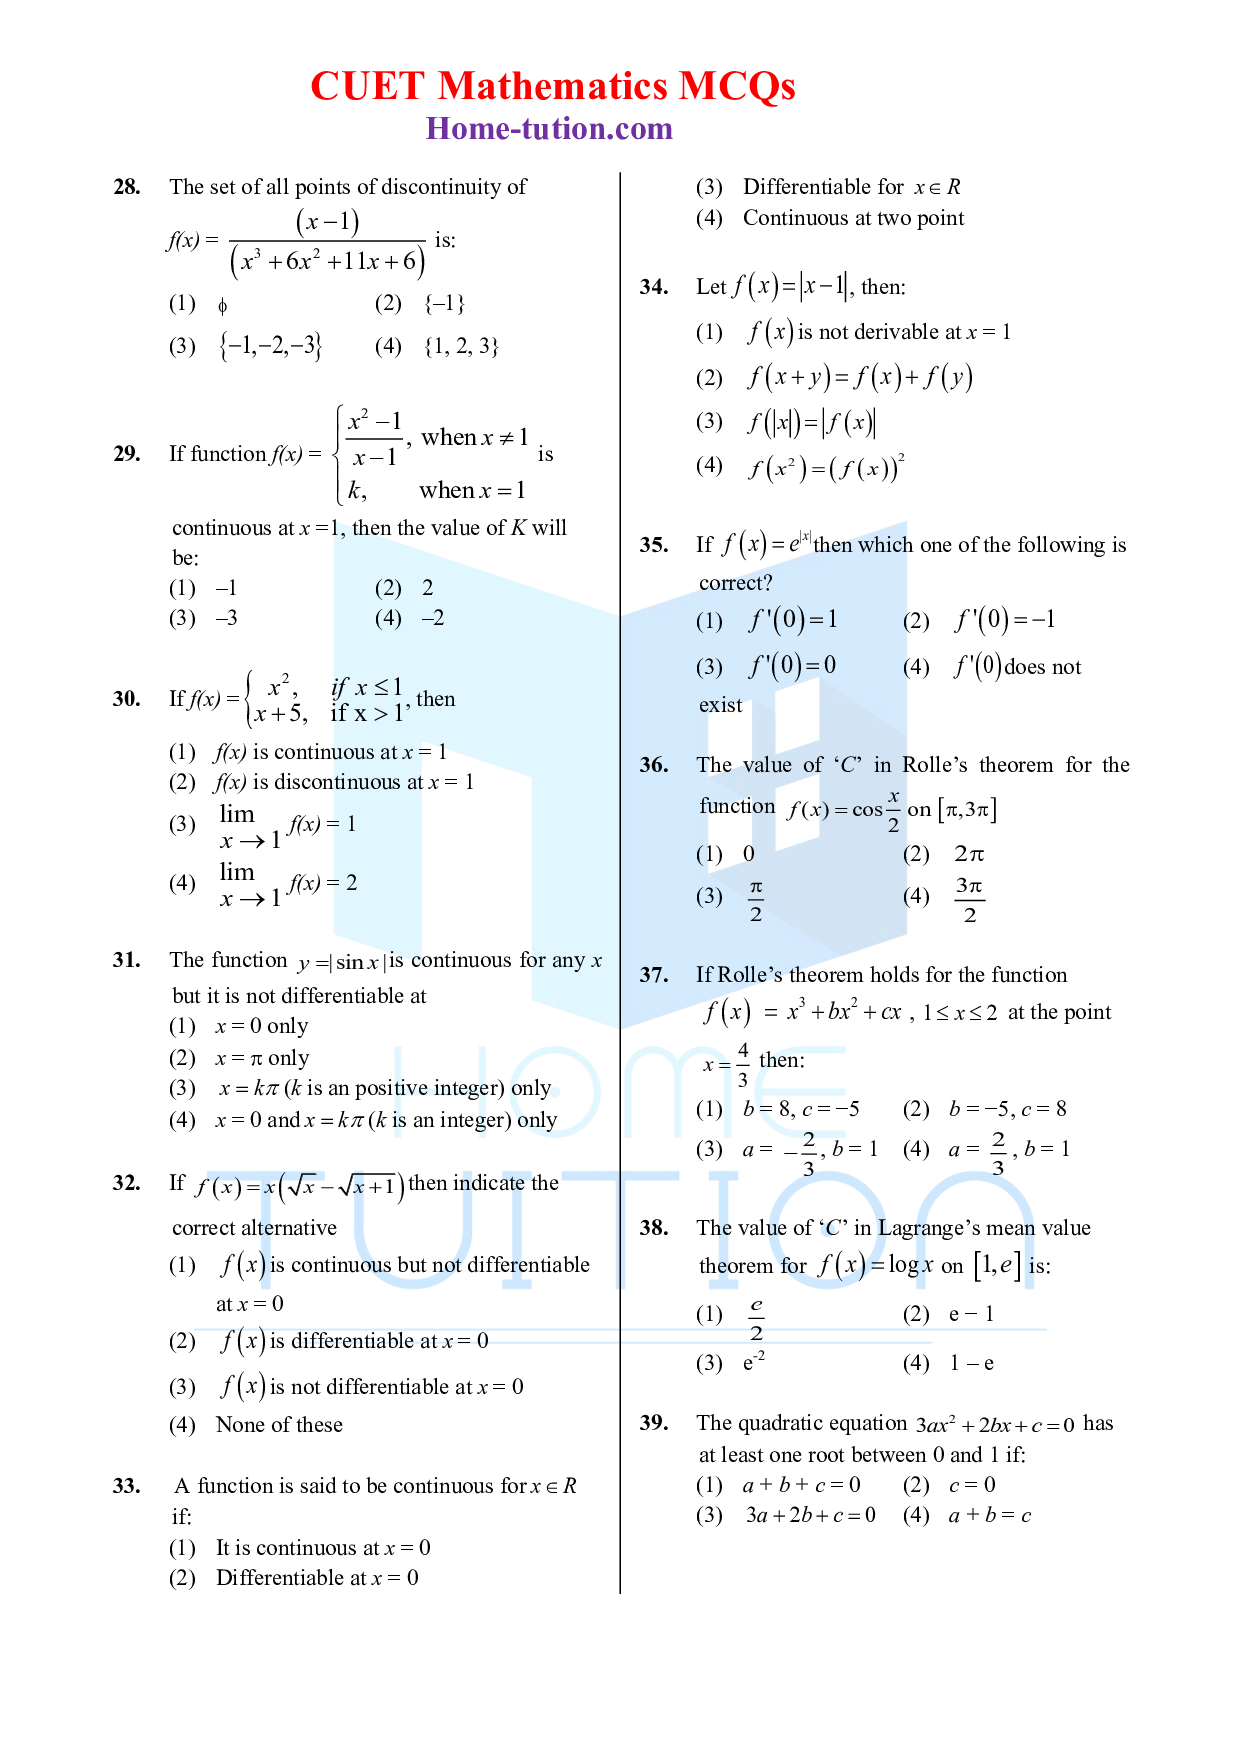 CUET MCQ Questions For Maths Chapter-8 Limit, Continuity and Differentiability